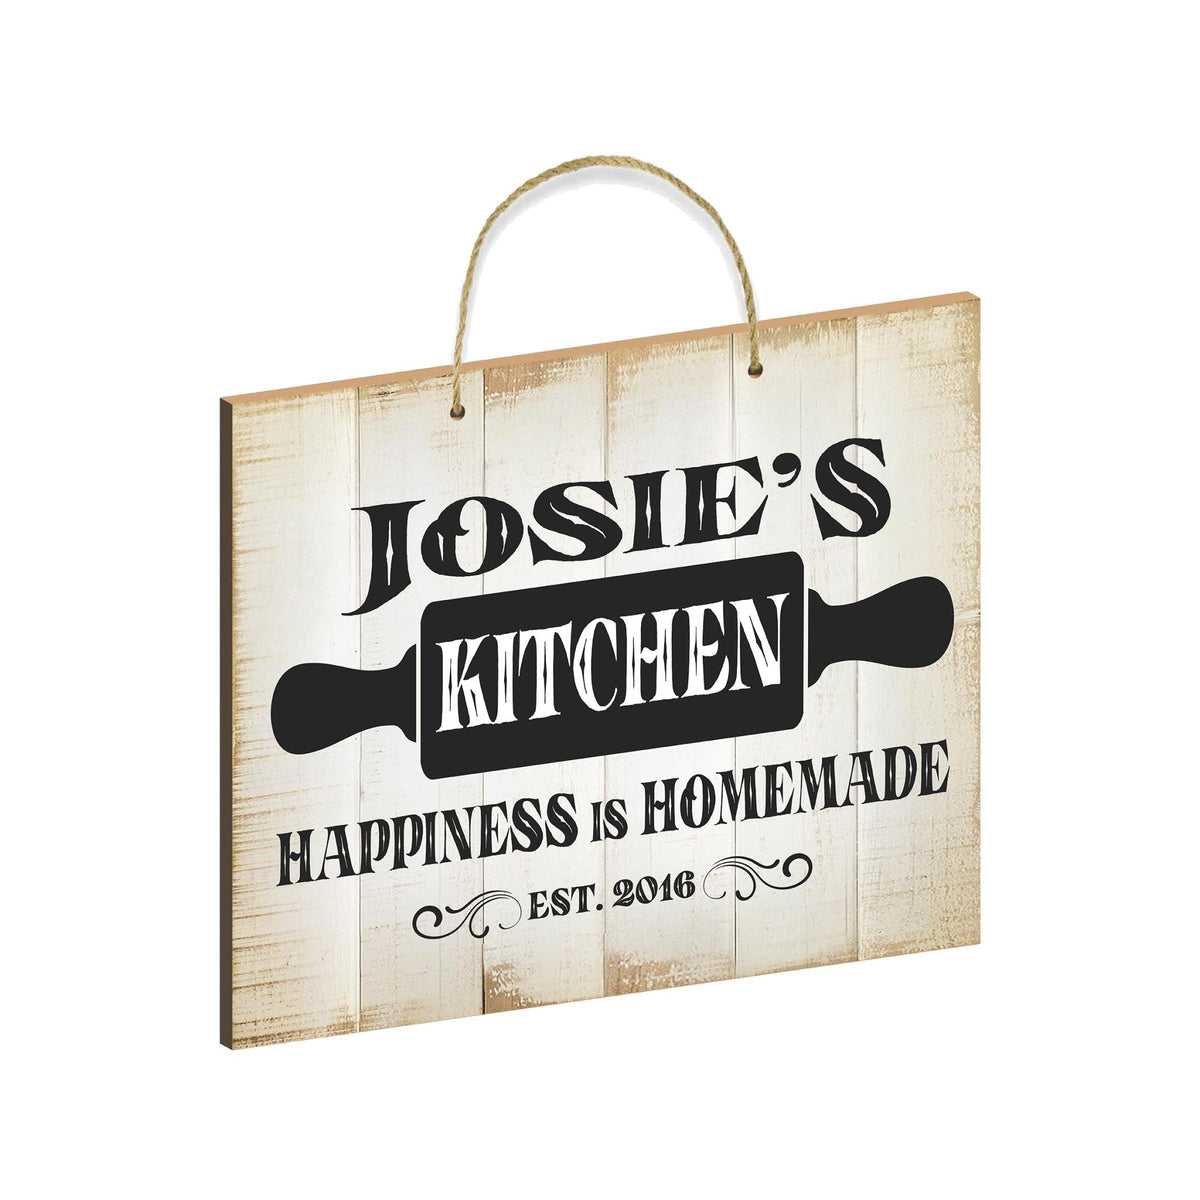 Rustic-Inspired Wooden Wall Hanging Rope Sign For Kitchen &amp; Home Décor - Happiness Is Homemade